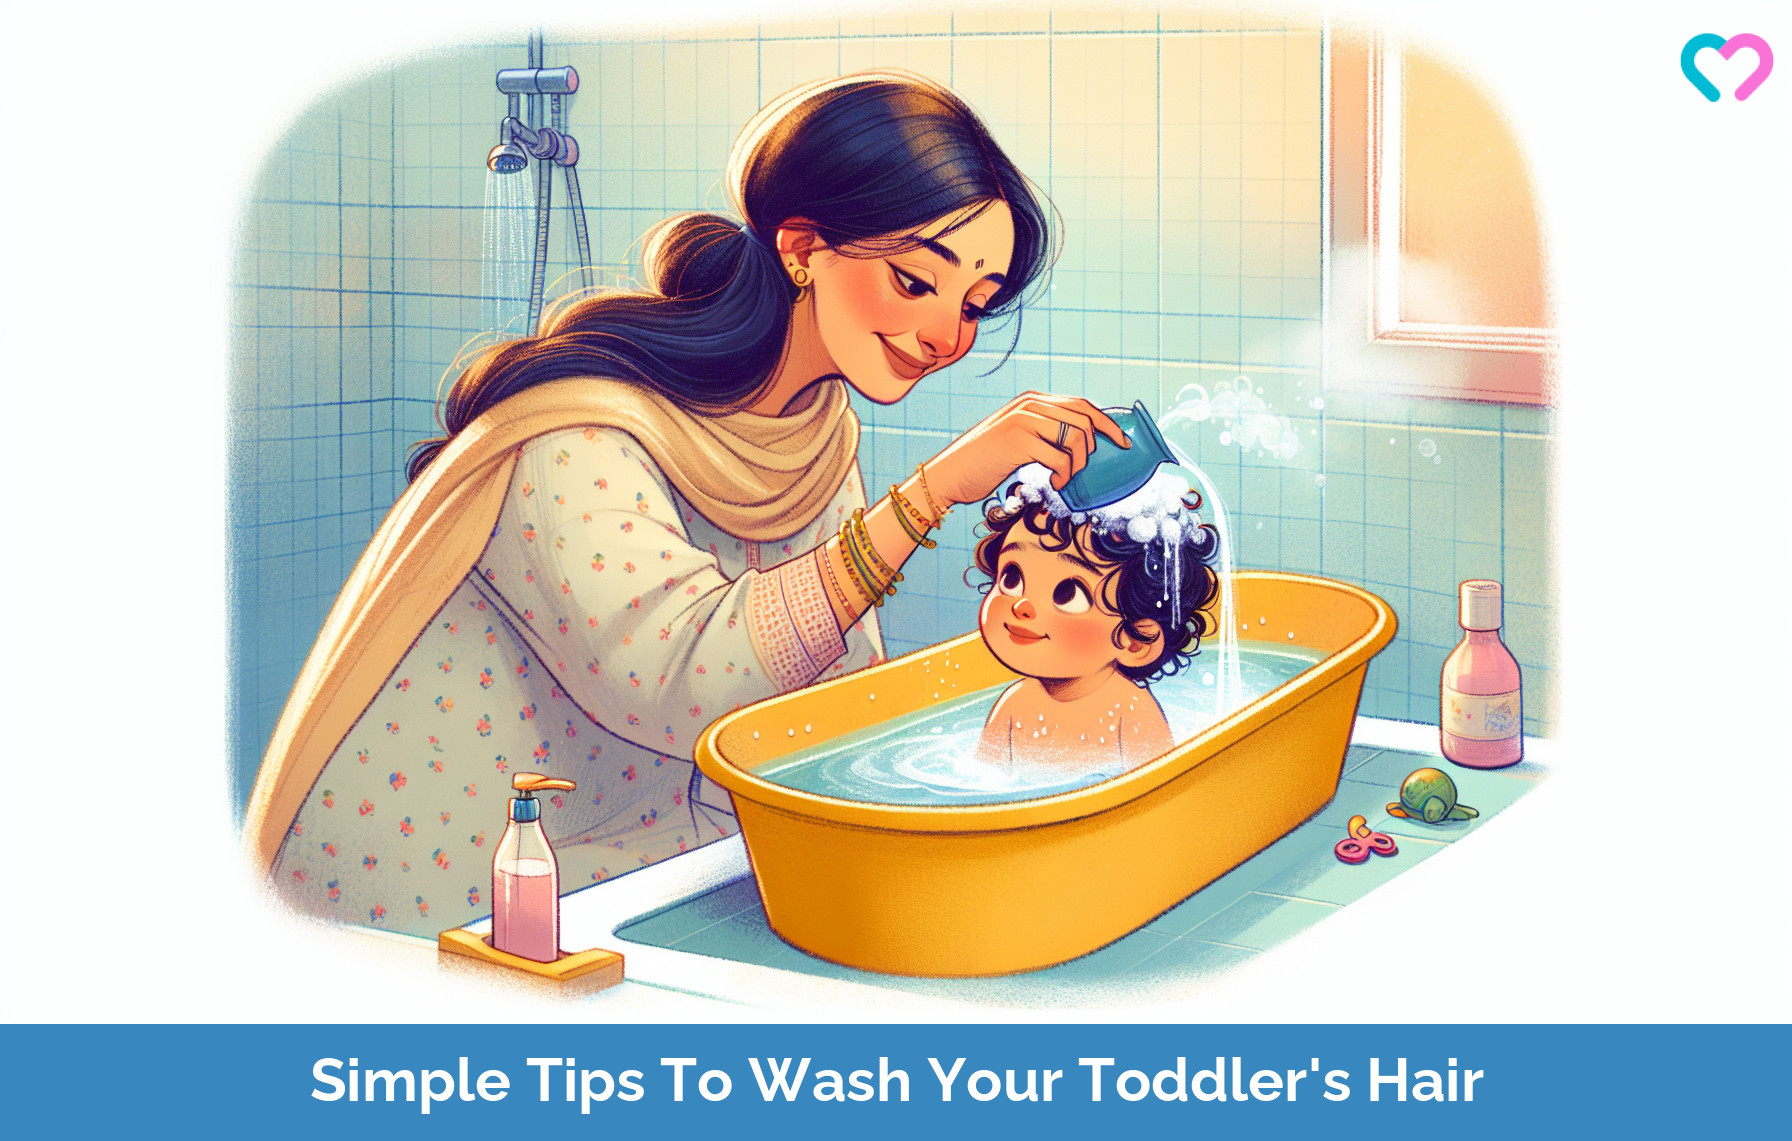 tips for washing toddlers hair_illustration